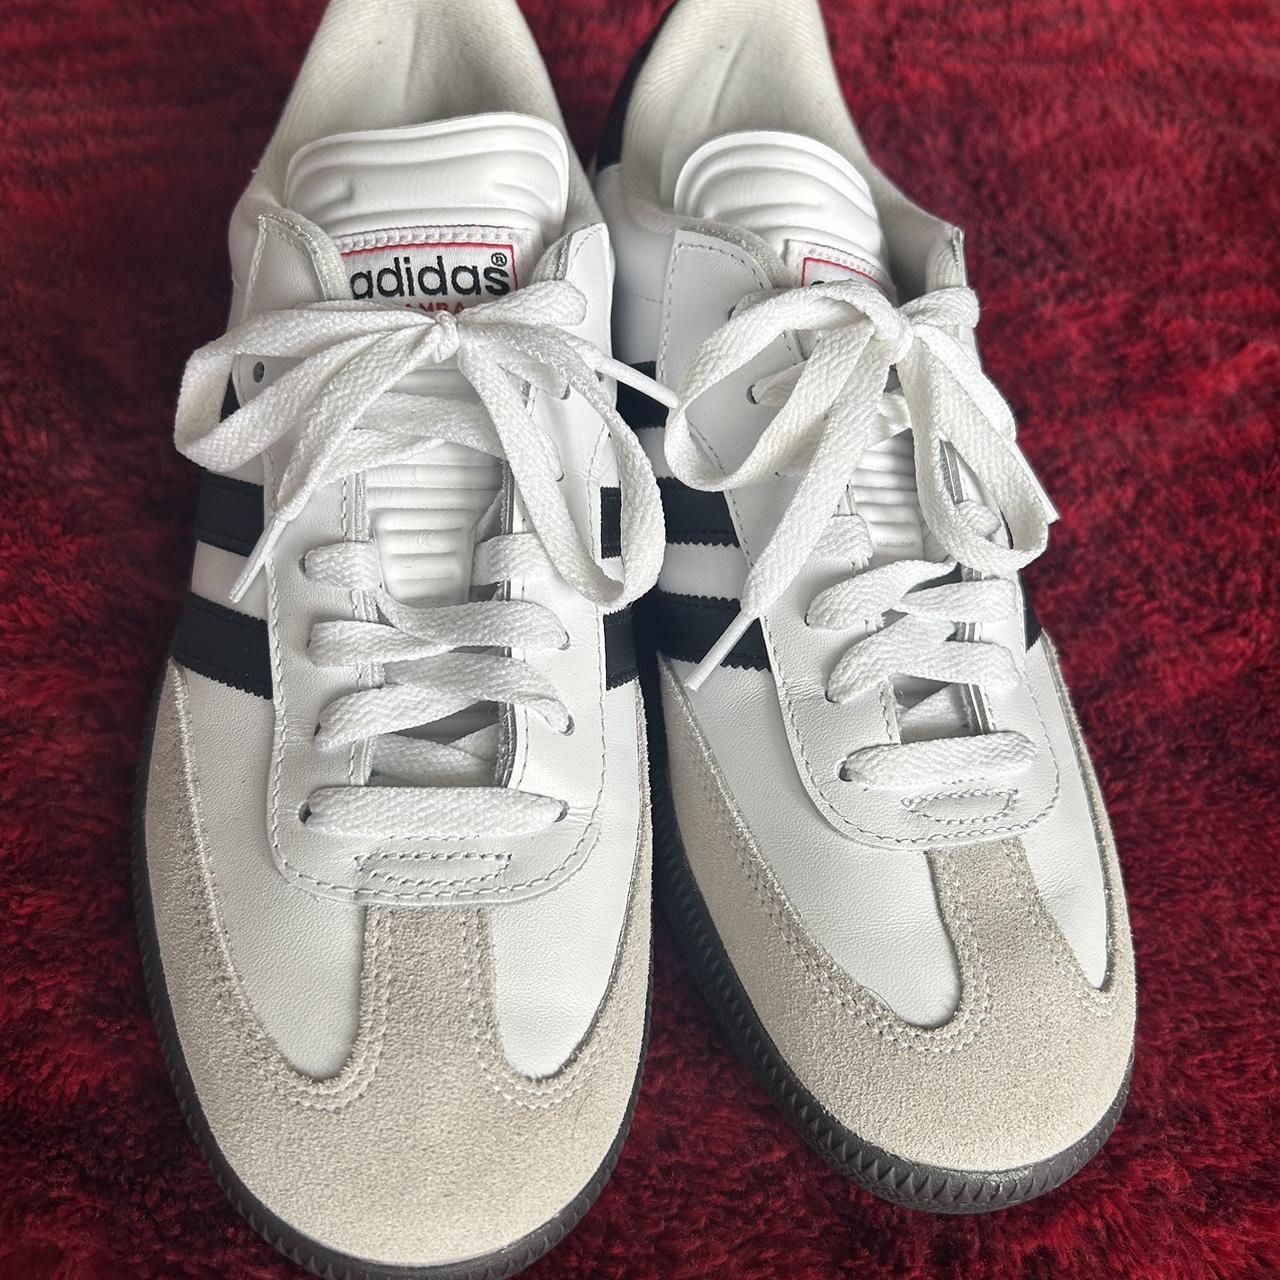 Adidas Men's White and Black Trainers | Depop